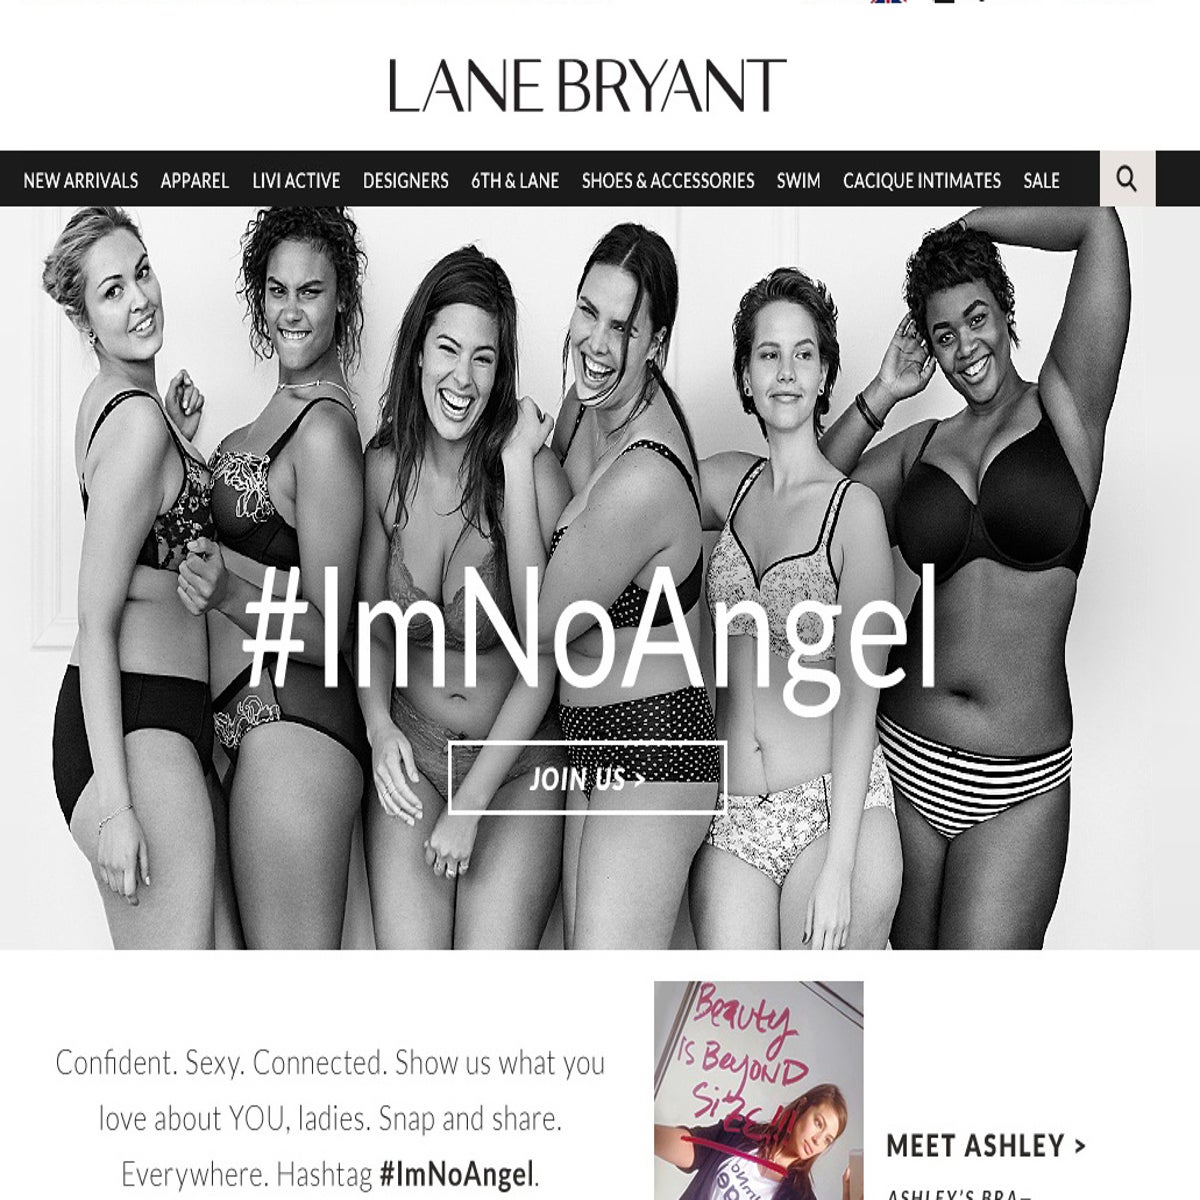 Plus size retailer Lane Bryant hits out at Victoria's Secret with  #ImNoAngel underwear campaign, The Independent